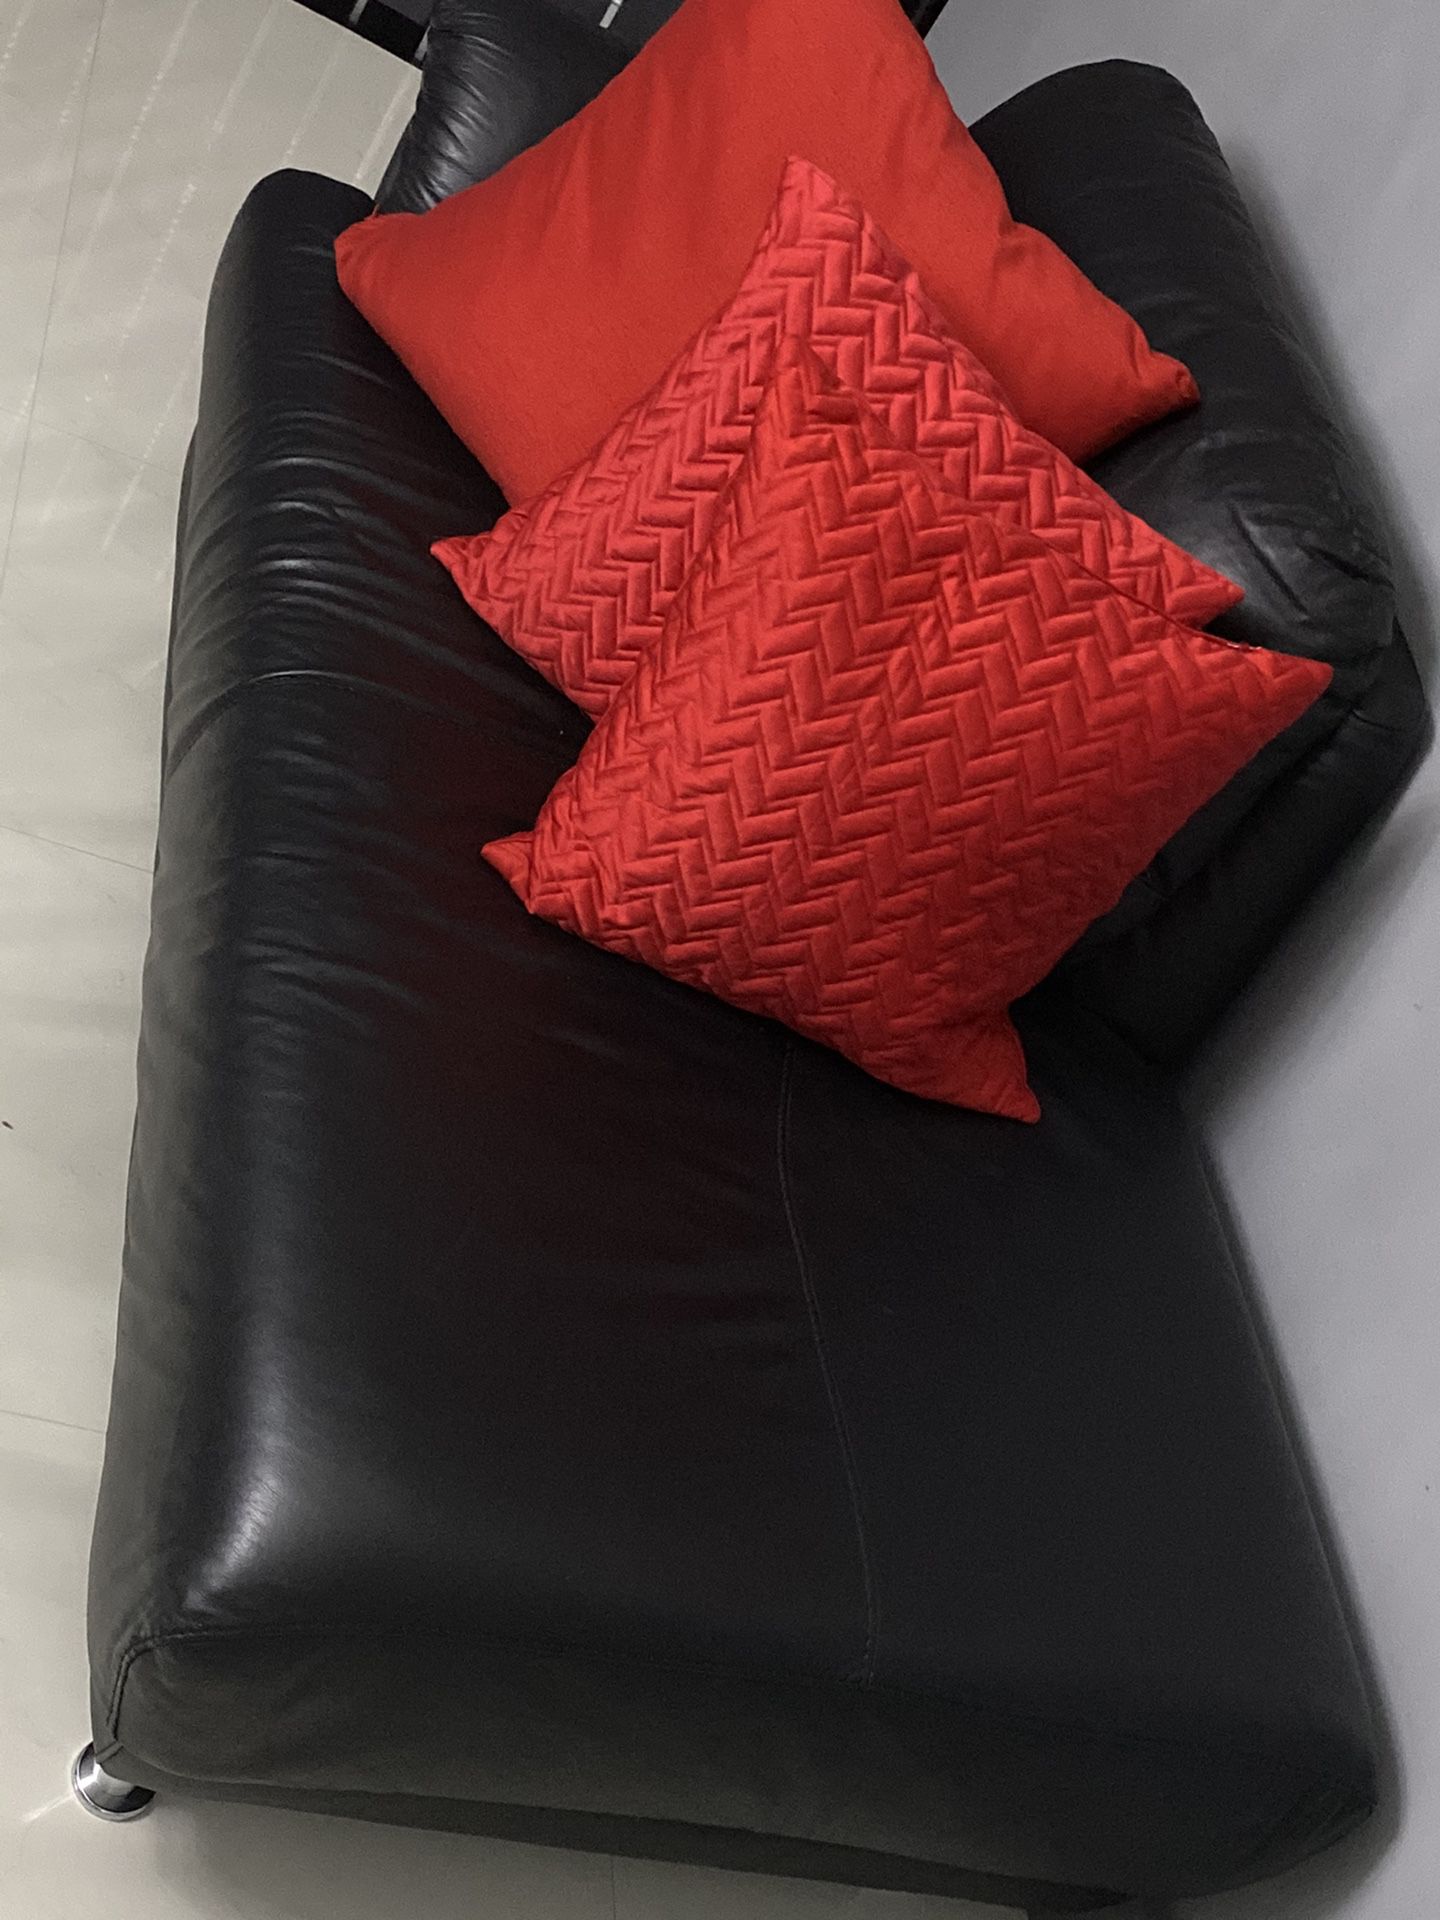 Black Leather Couch-Pillows Not Included